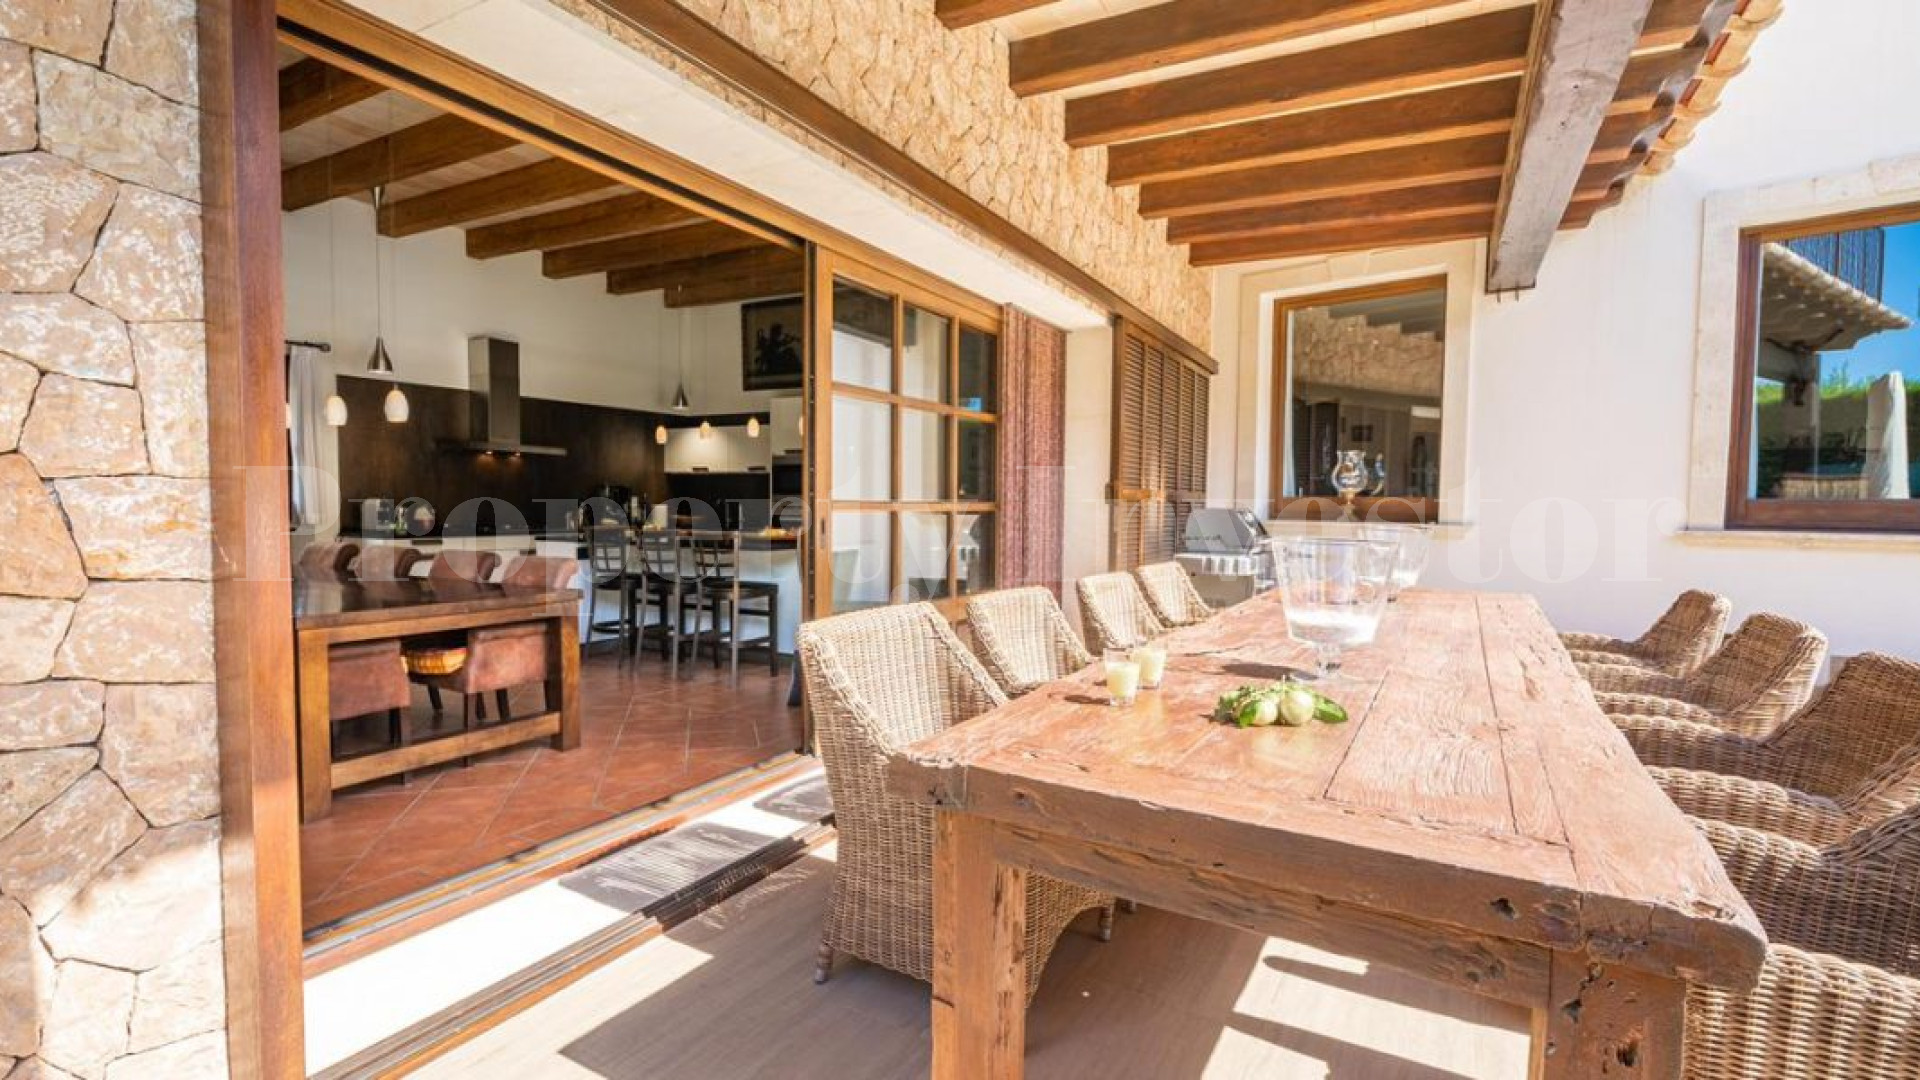 Lovely 4 Bedroom Traditional Mediterranean Style Villa For Sale in Portals Nous, Mallorca